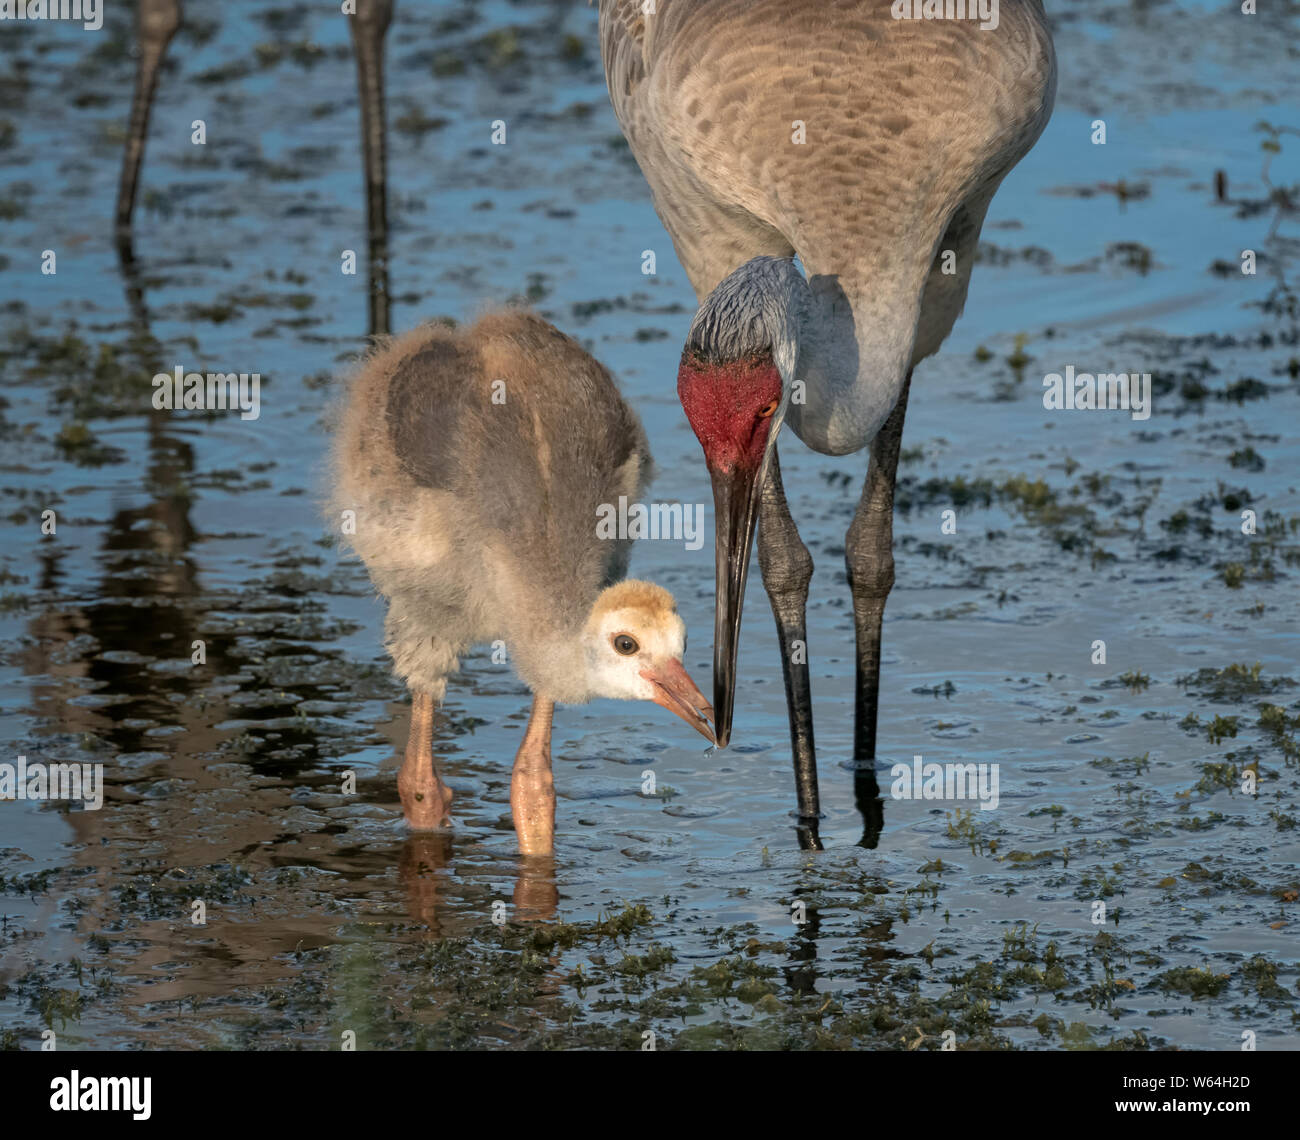 Sand Hill Crane chick being fed by an adult in shallow water Stock Photo